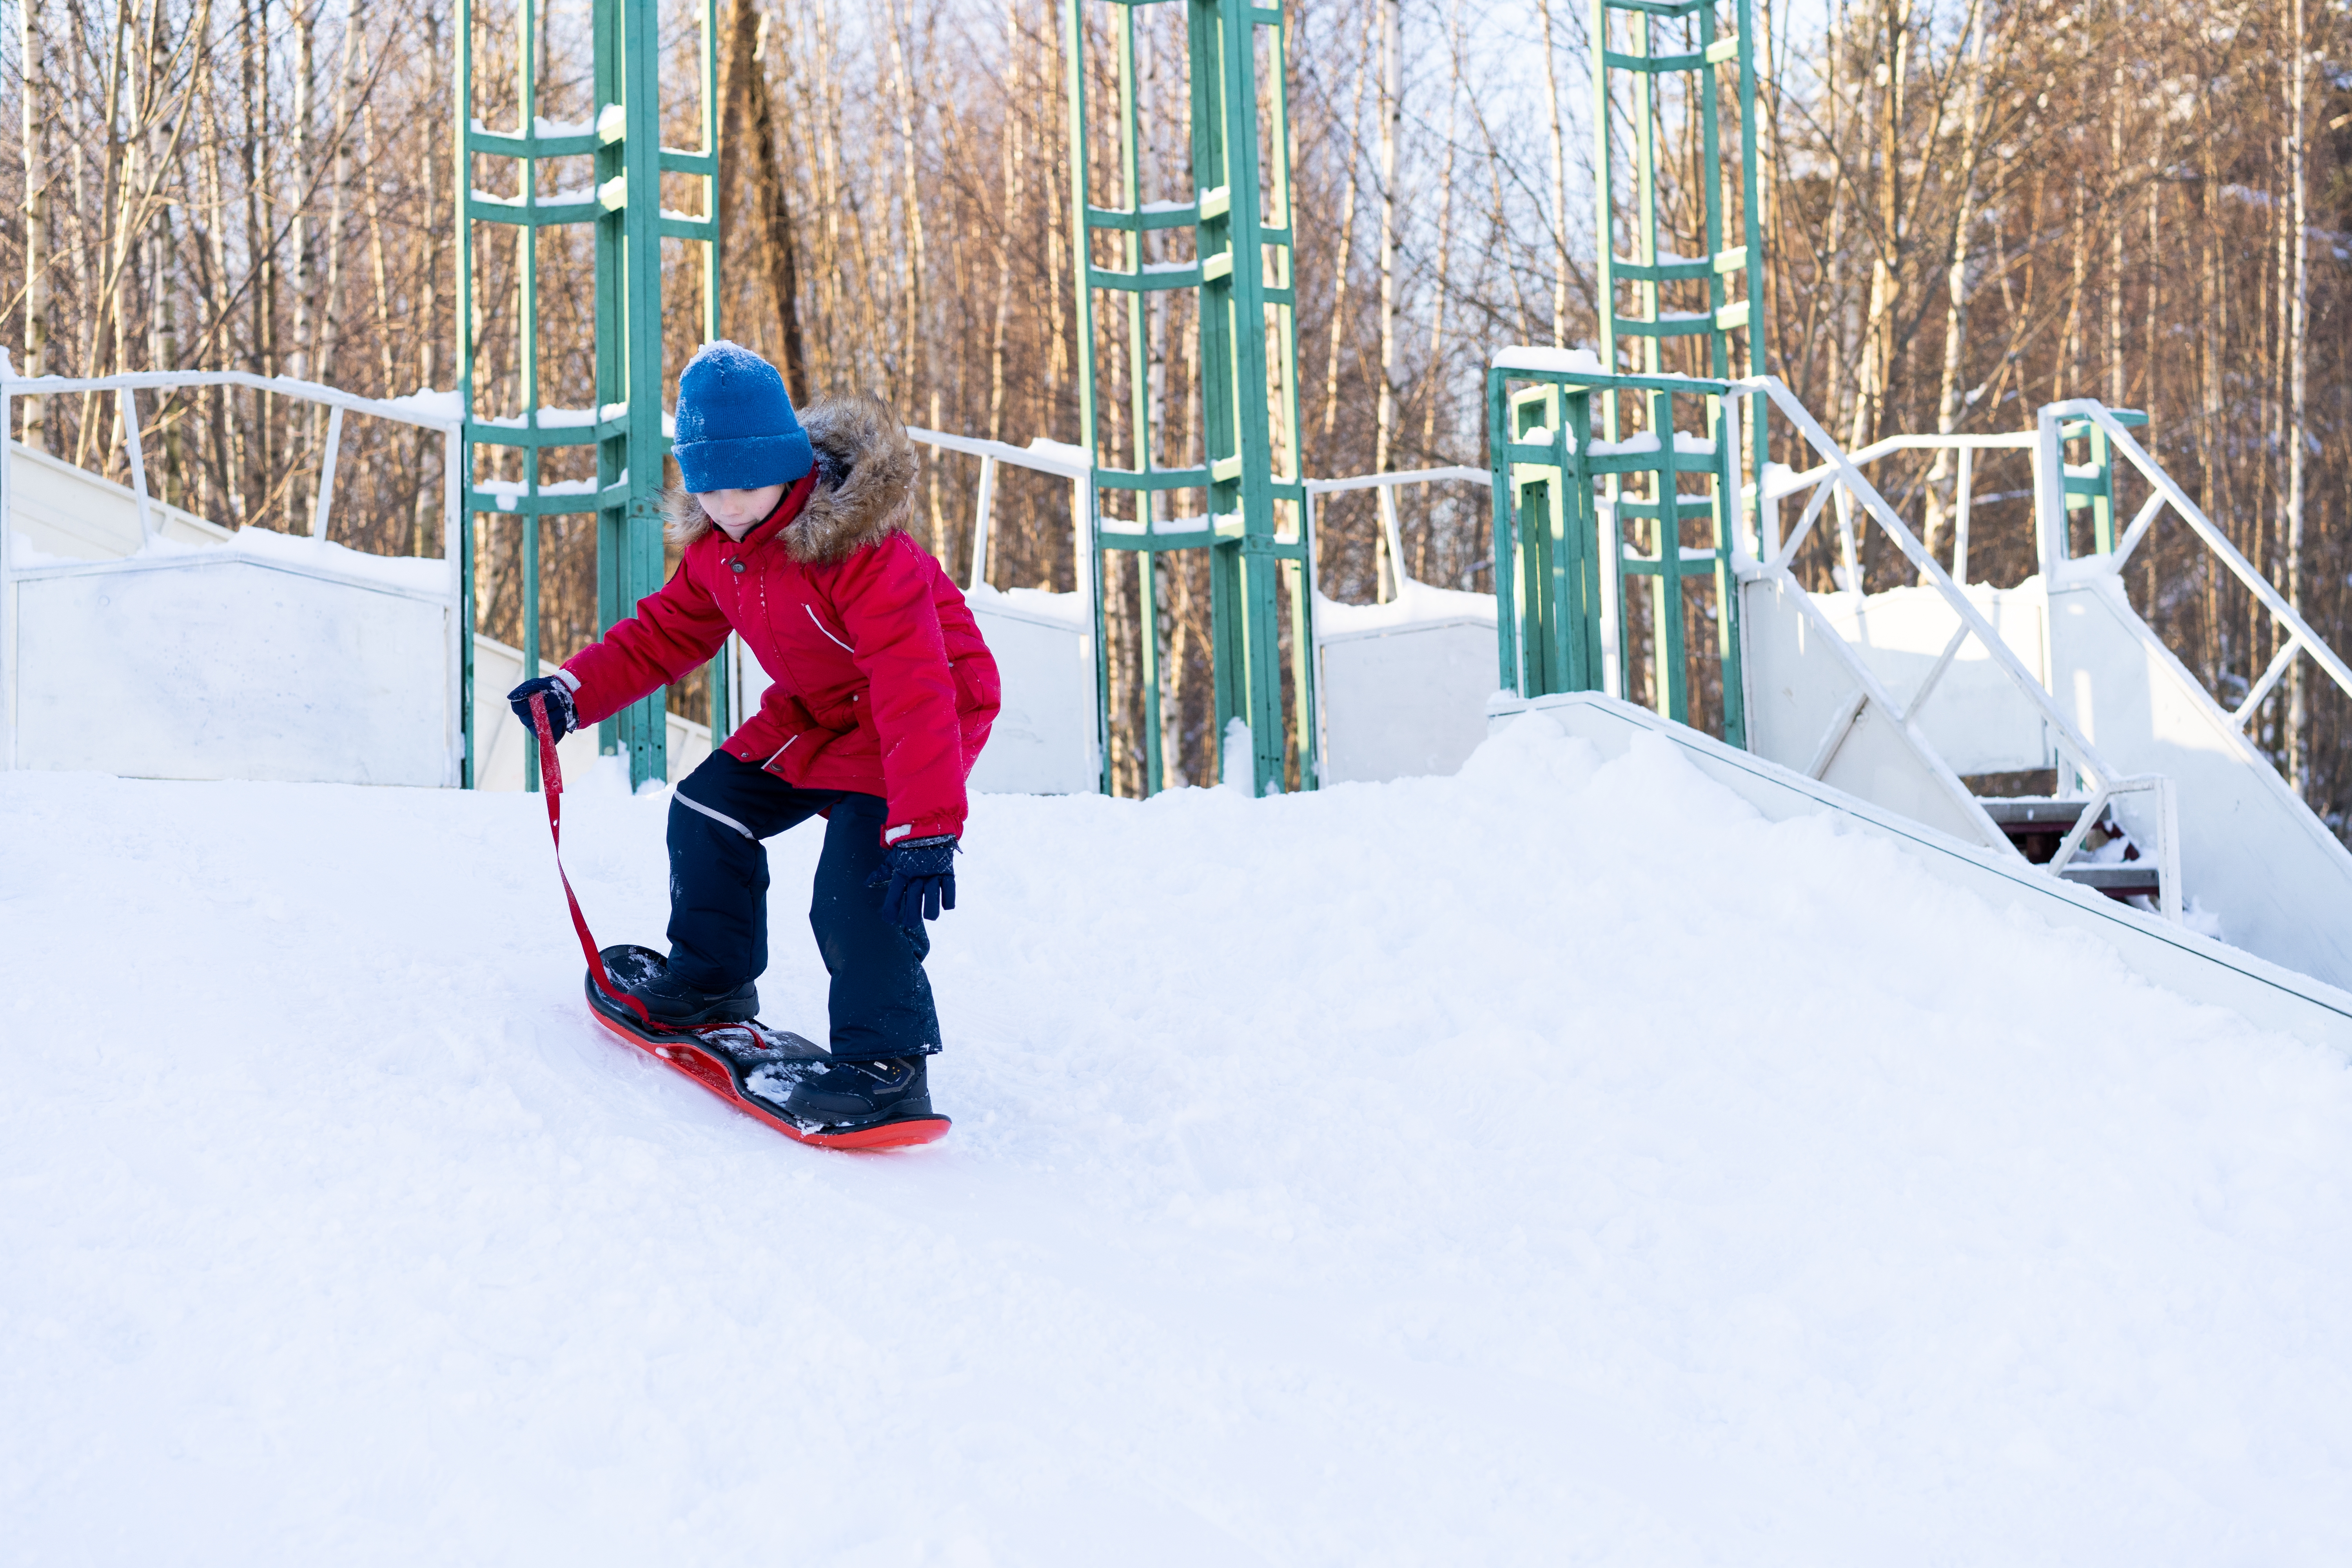 The boy learns to ride children's snowboarding, winter sports